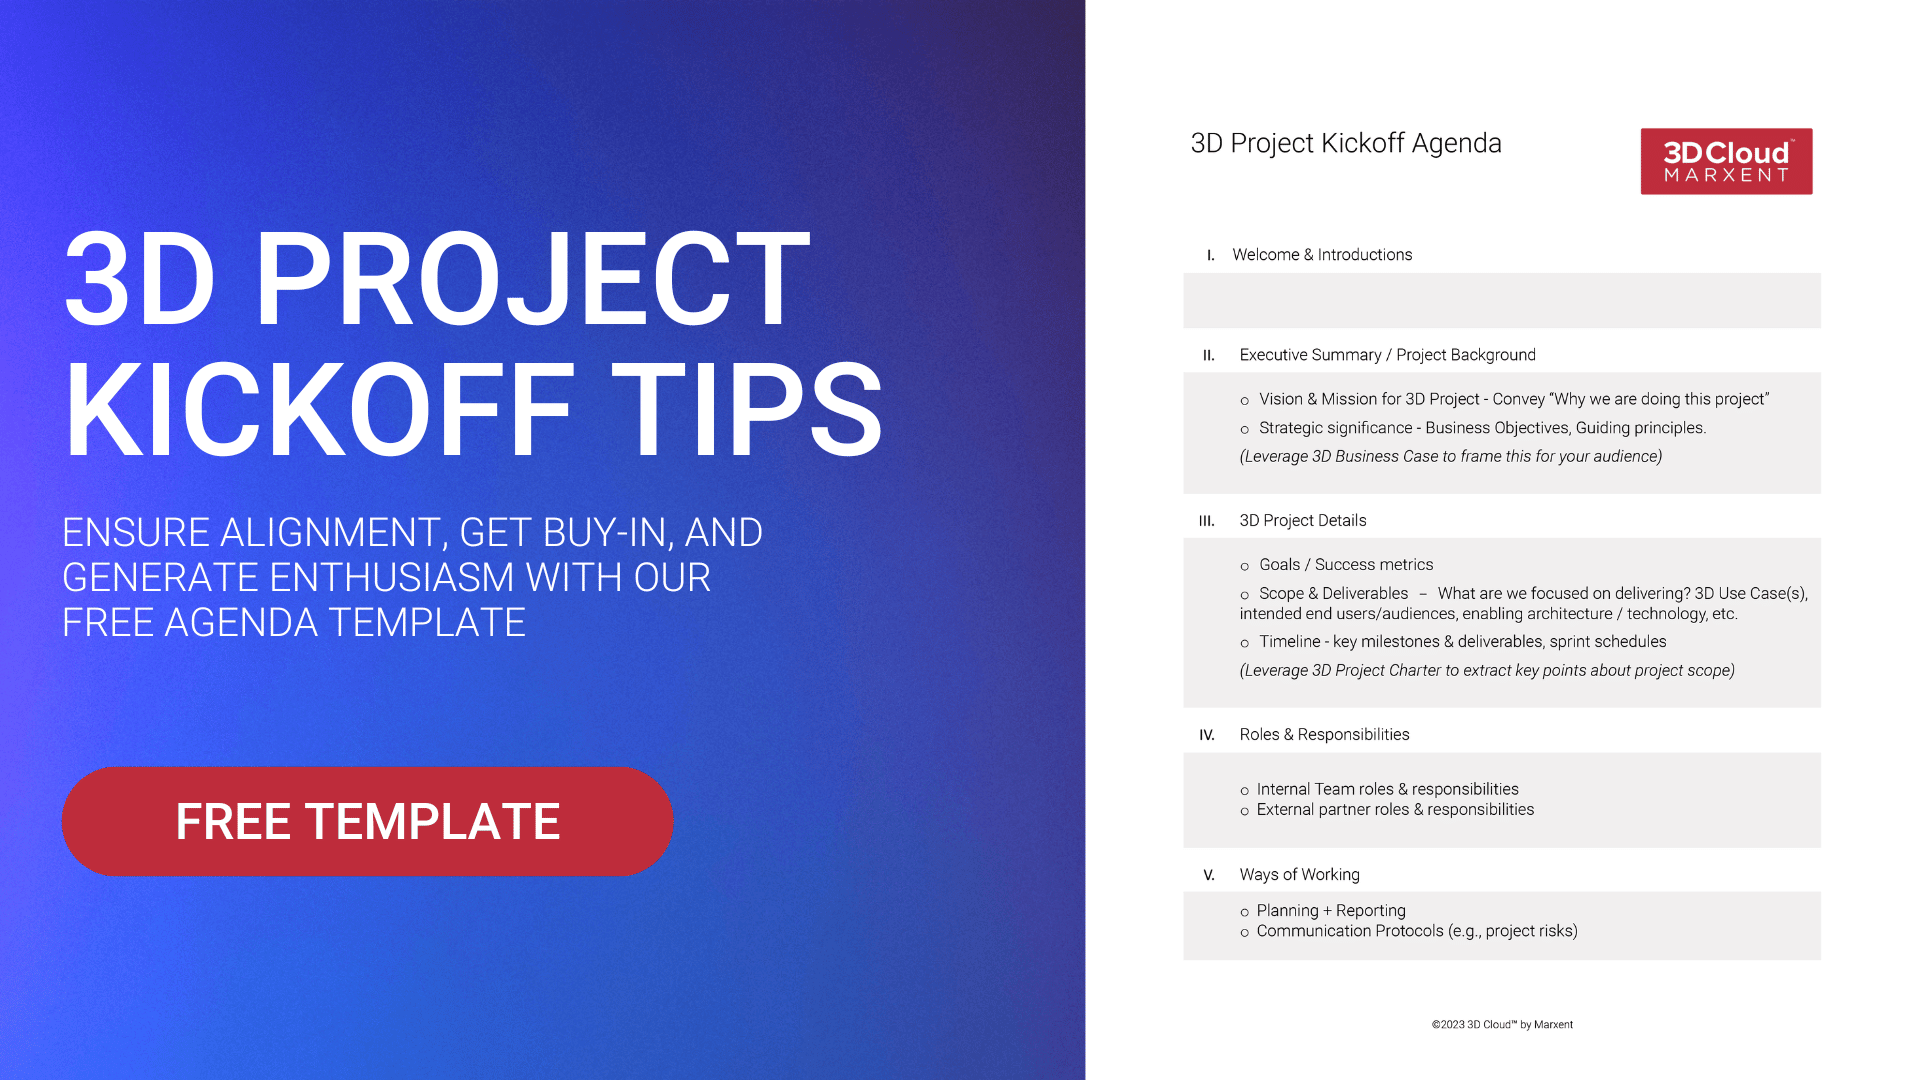 3D Project Kickoff Best Practices – PLUS: Free Agenda Template